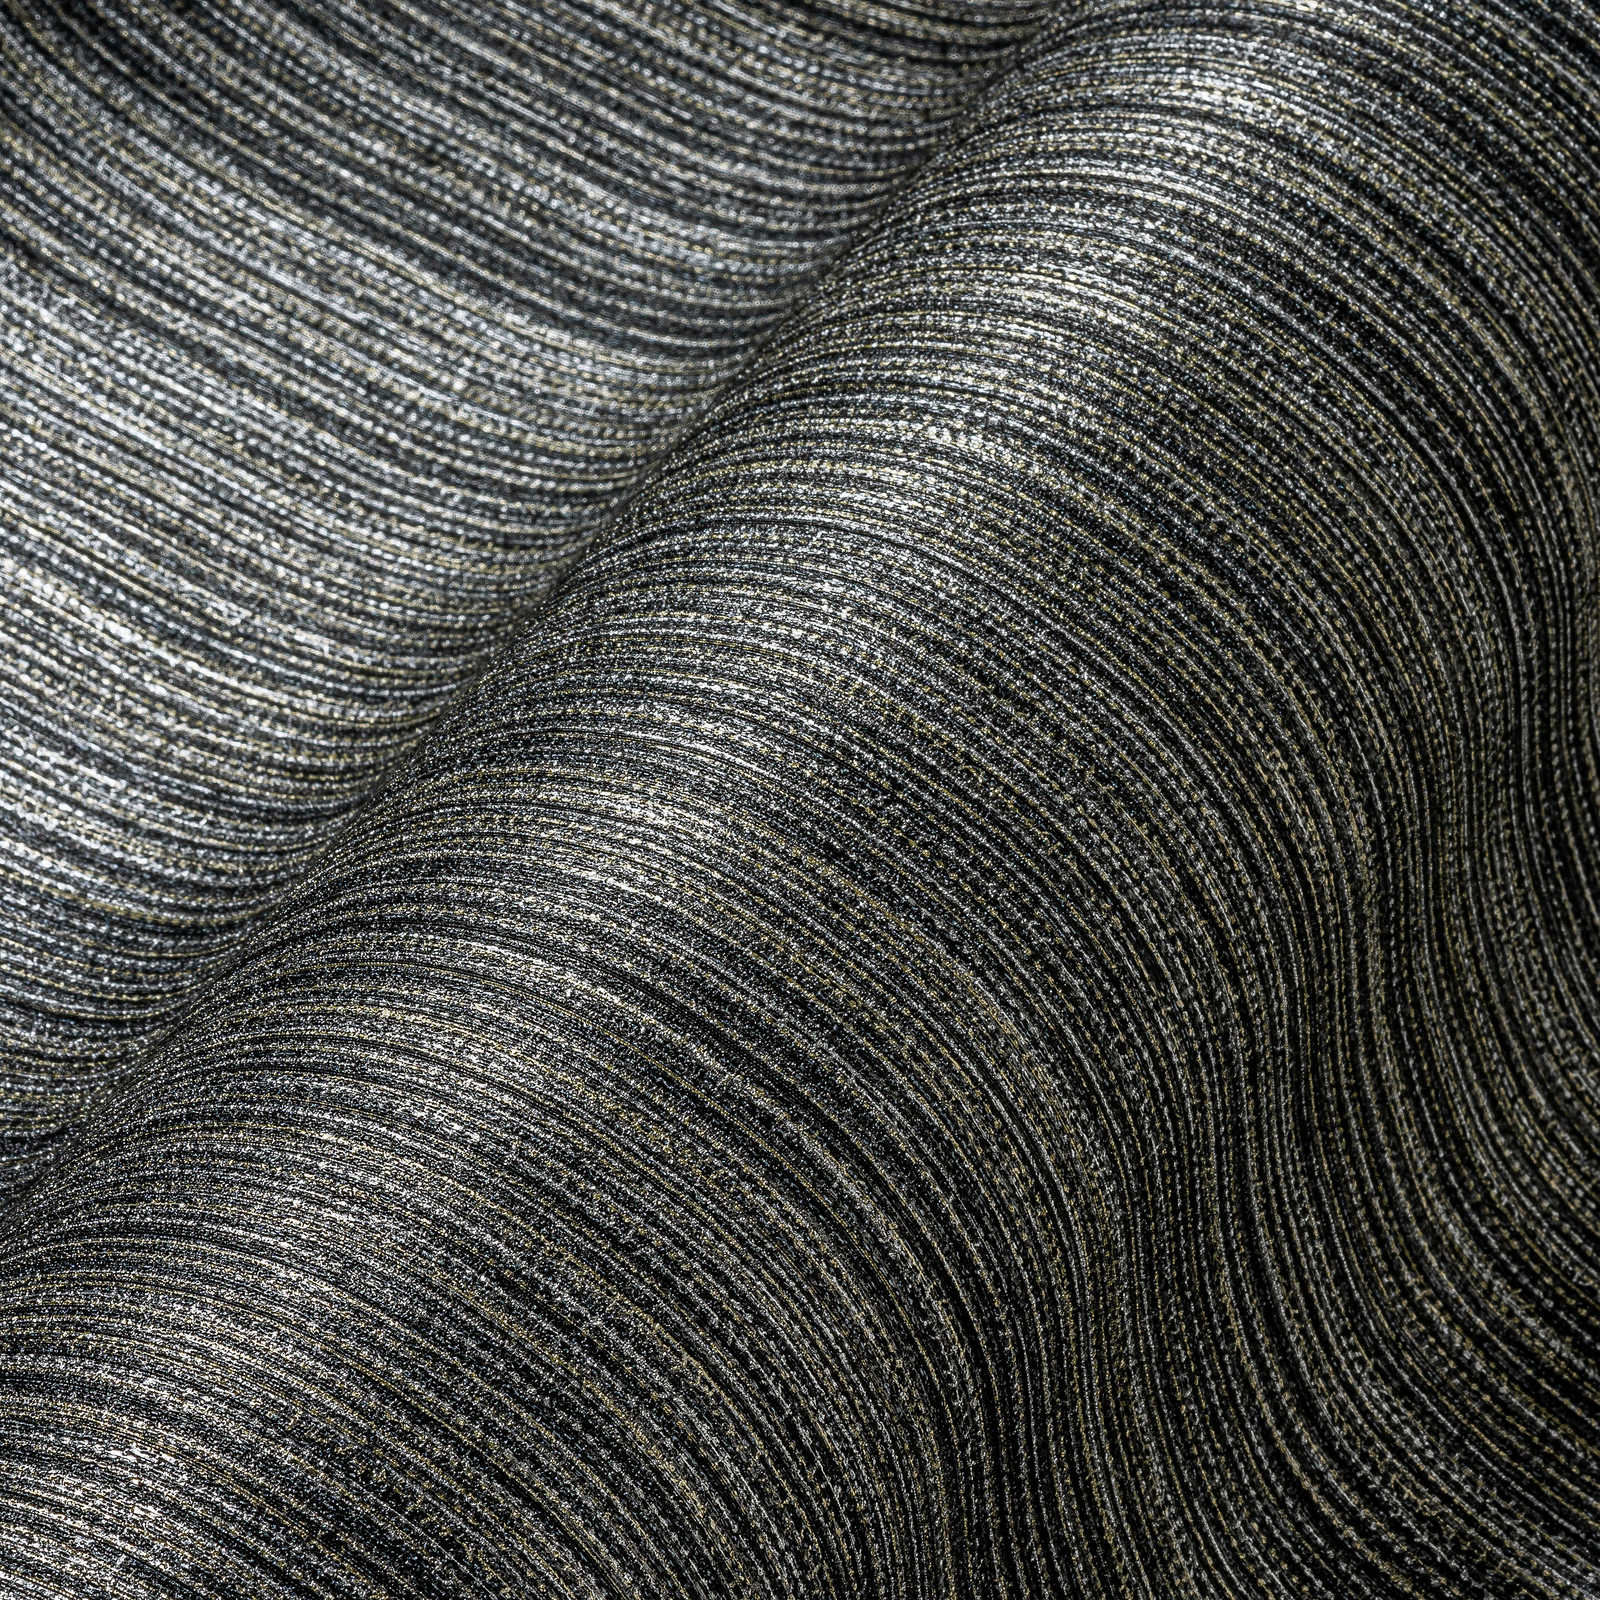             Wallpaper with textile design and line effect - black
        